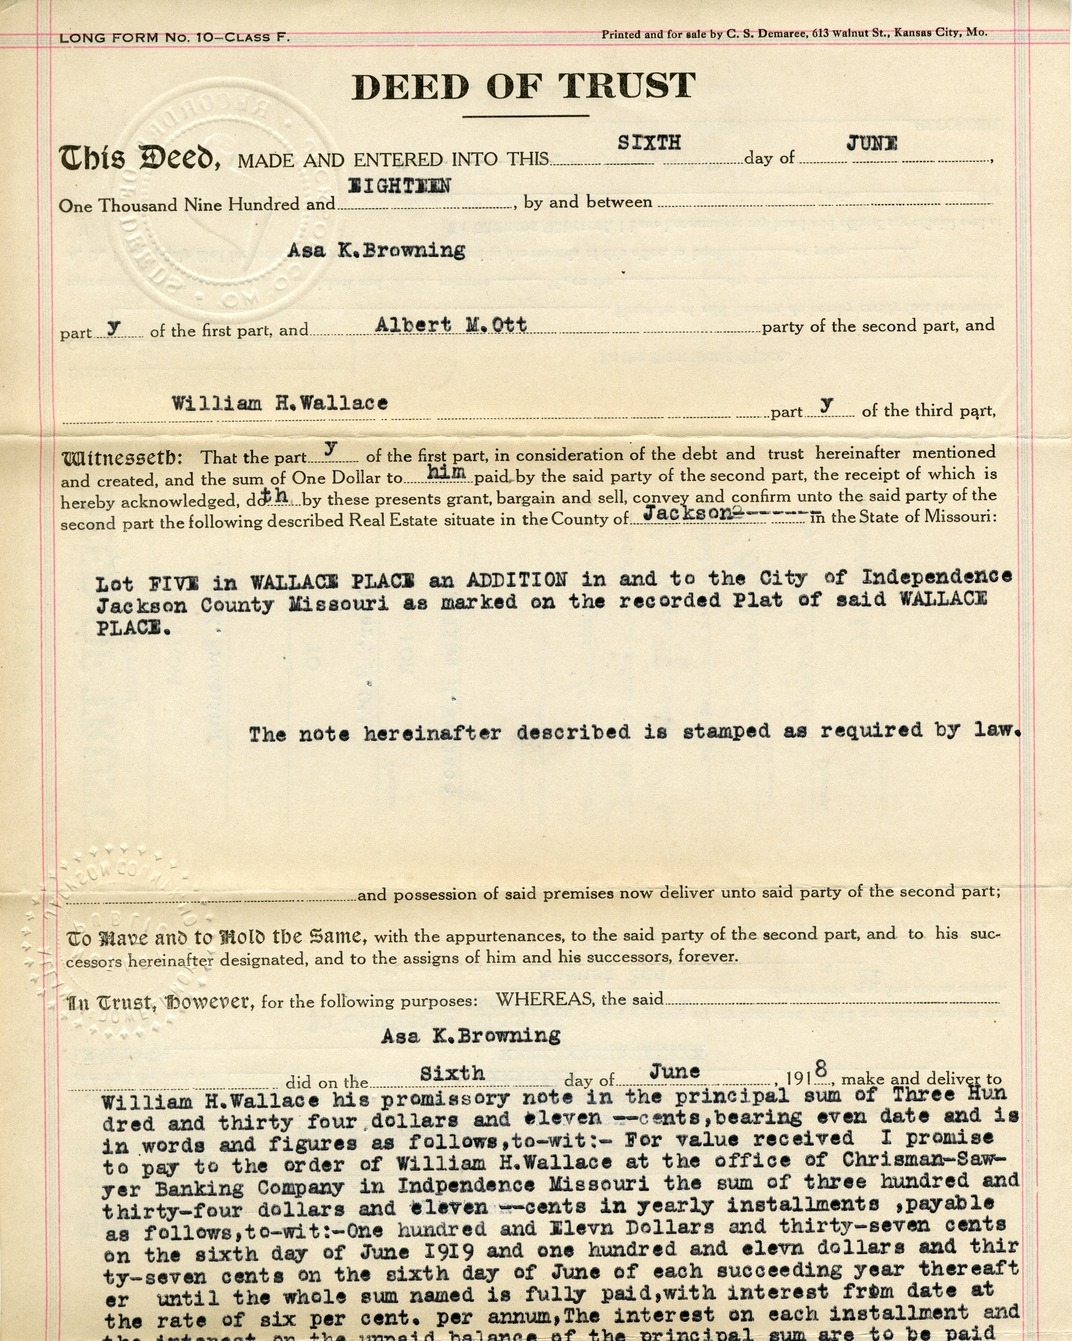 Deed of Trust from Asa K. Browning to Albert M. Ott for William H. Wallace